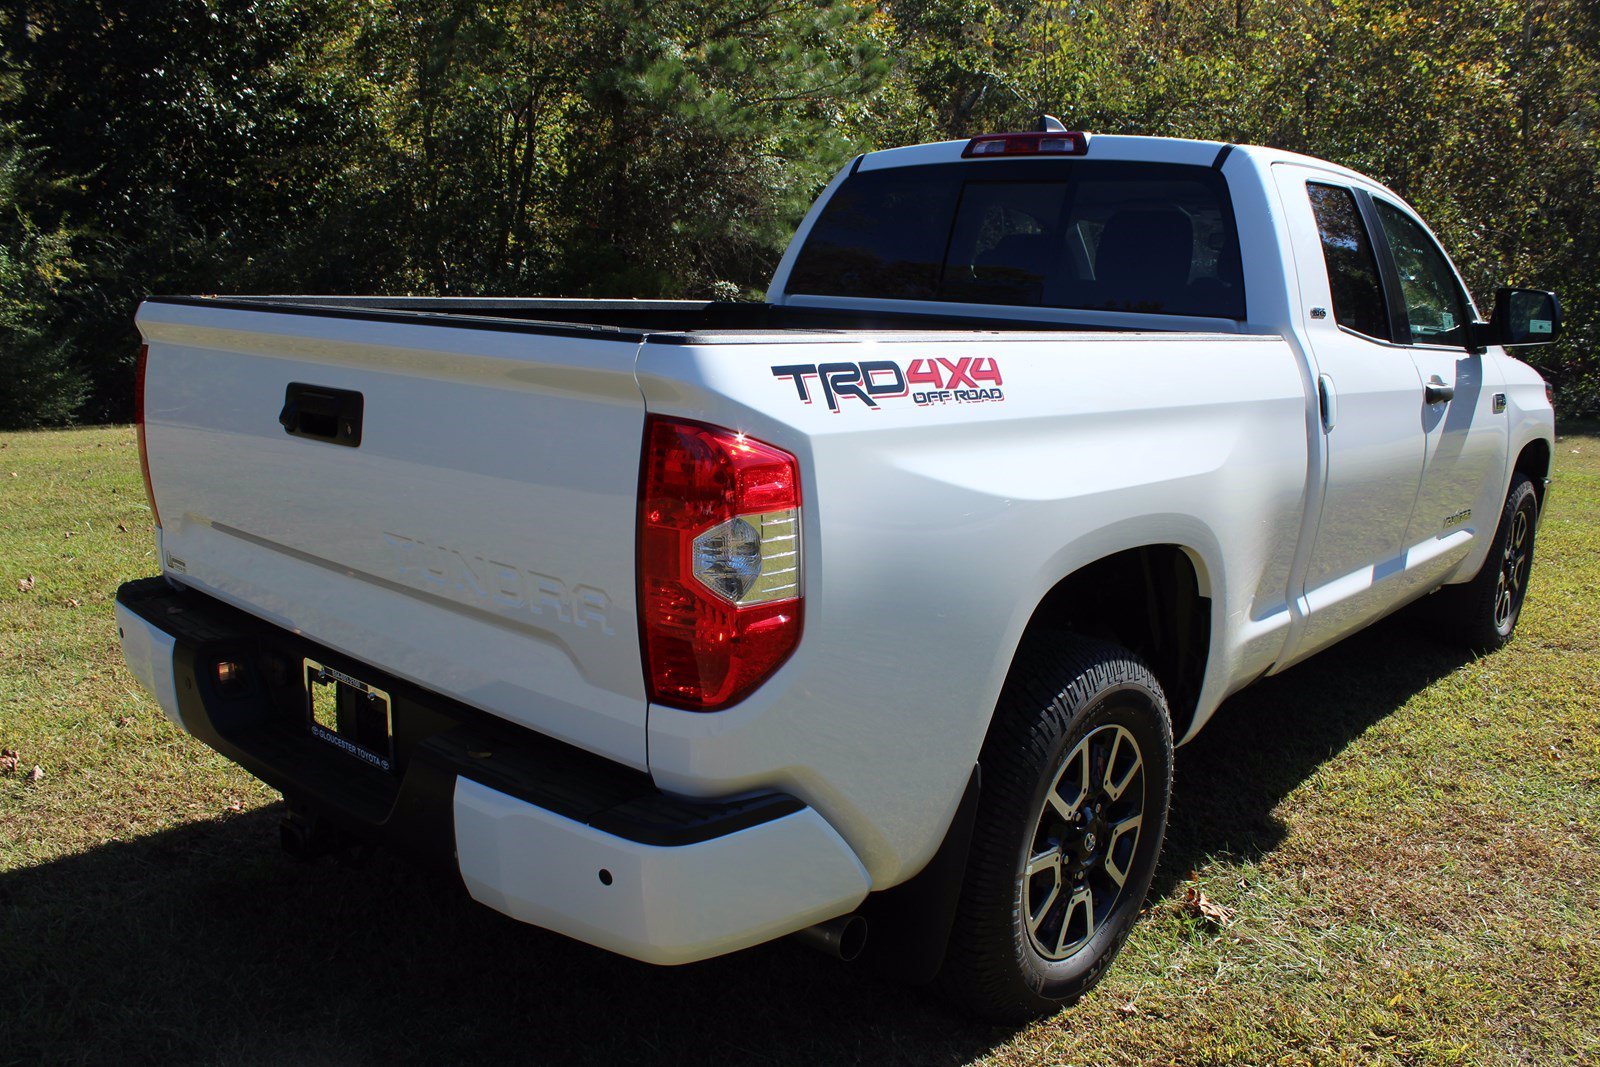 New 2020 Toyota Tundra 4WD SR5 Crew Cab Pickup in Gloucester #9104